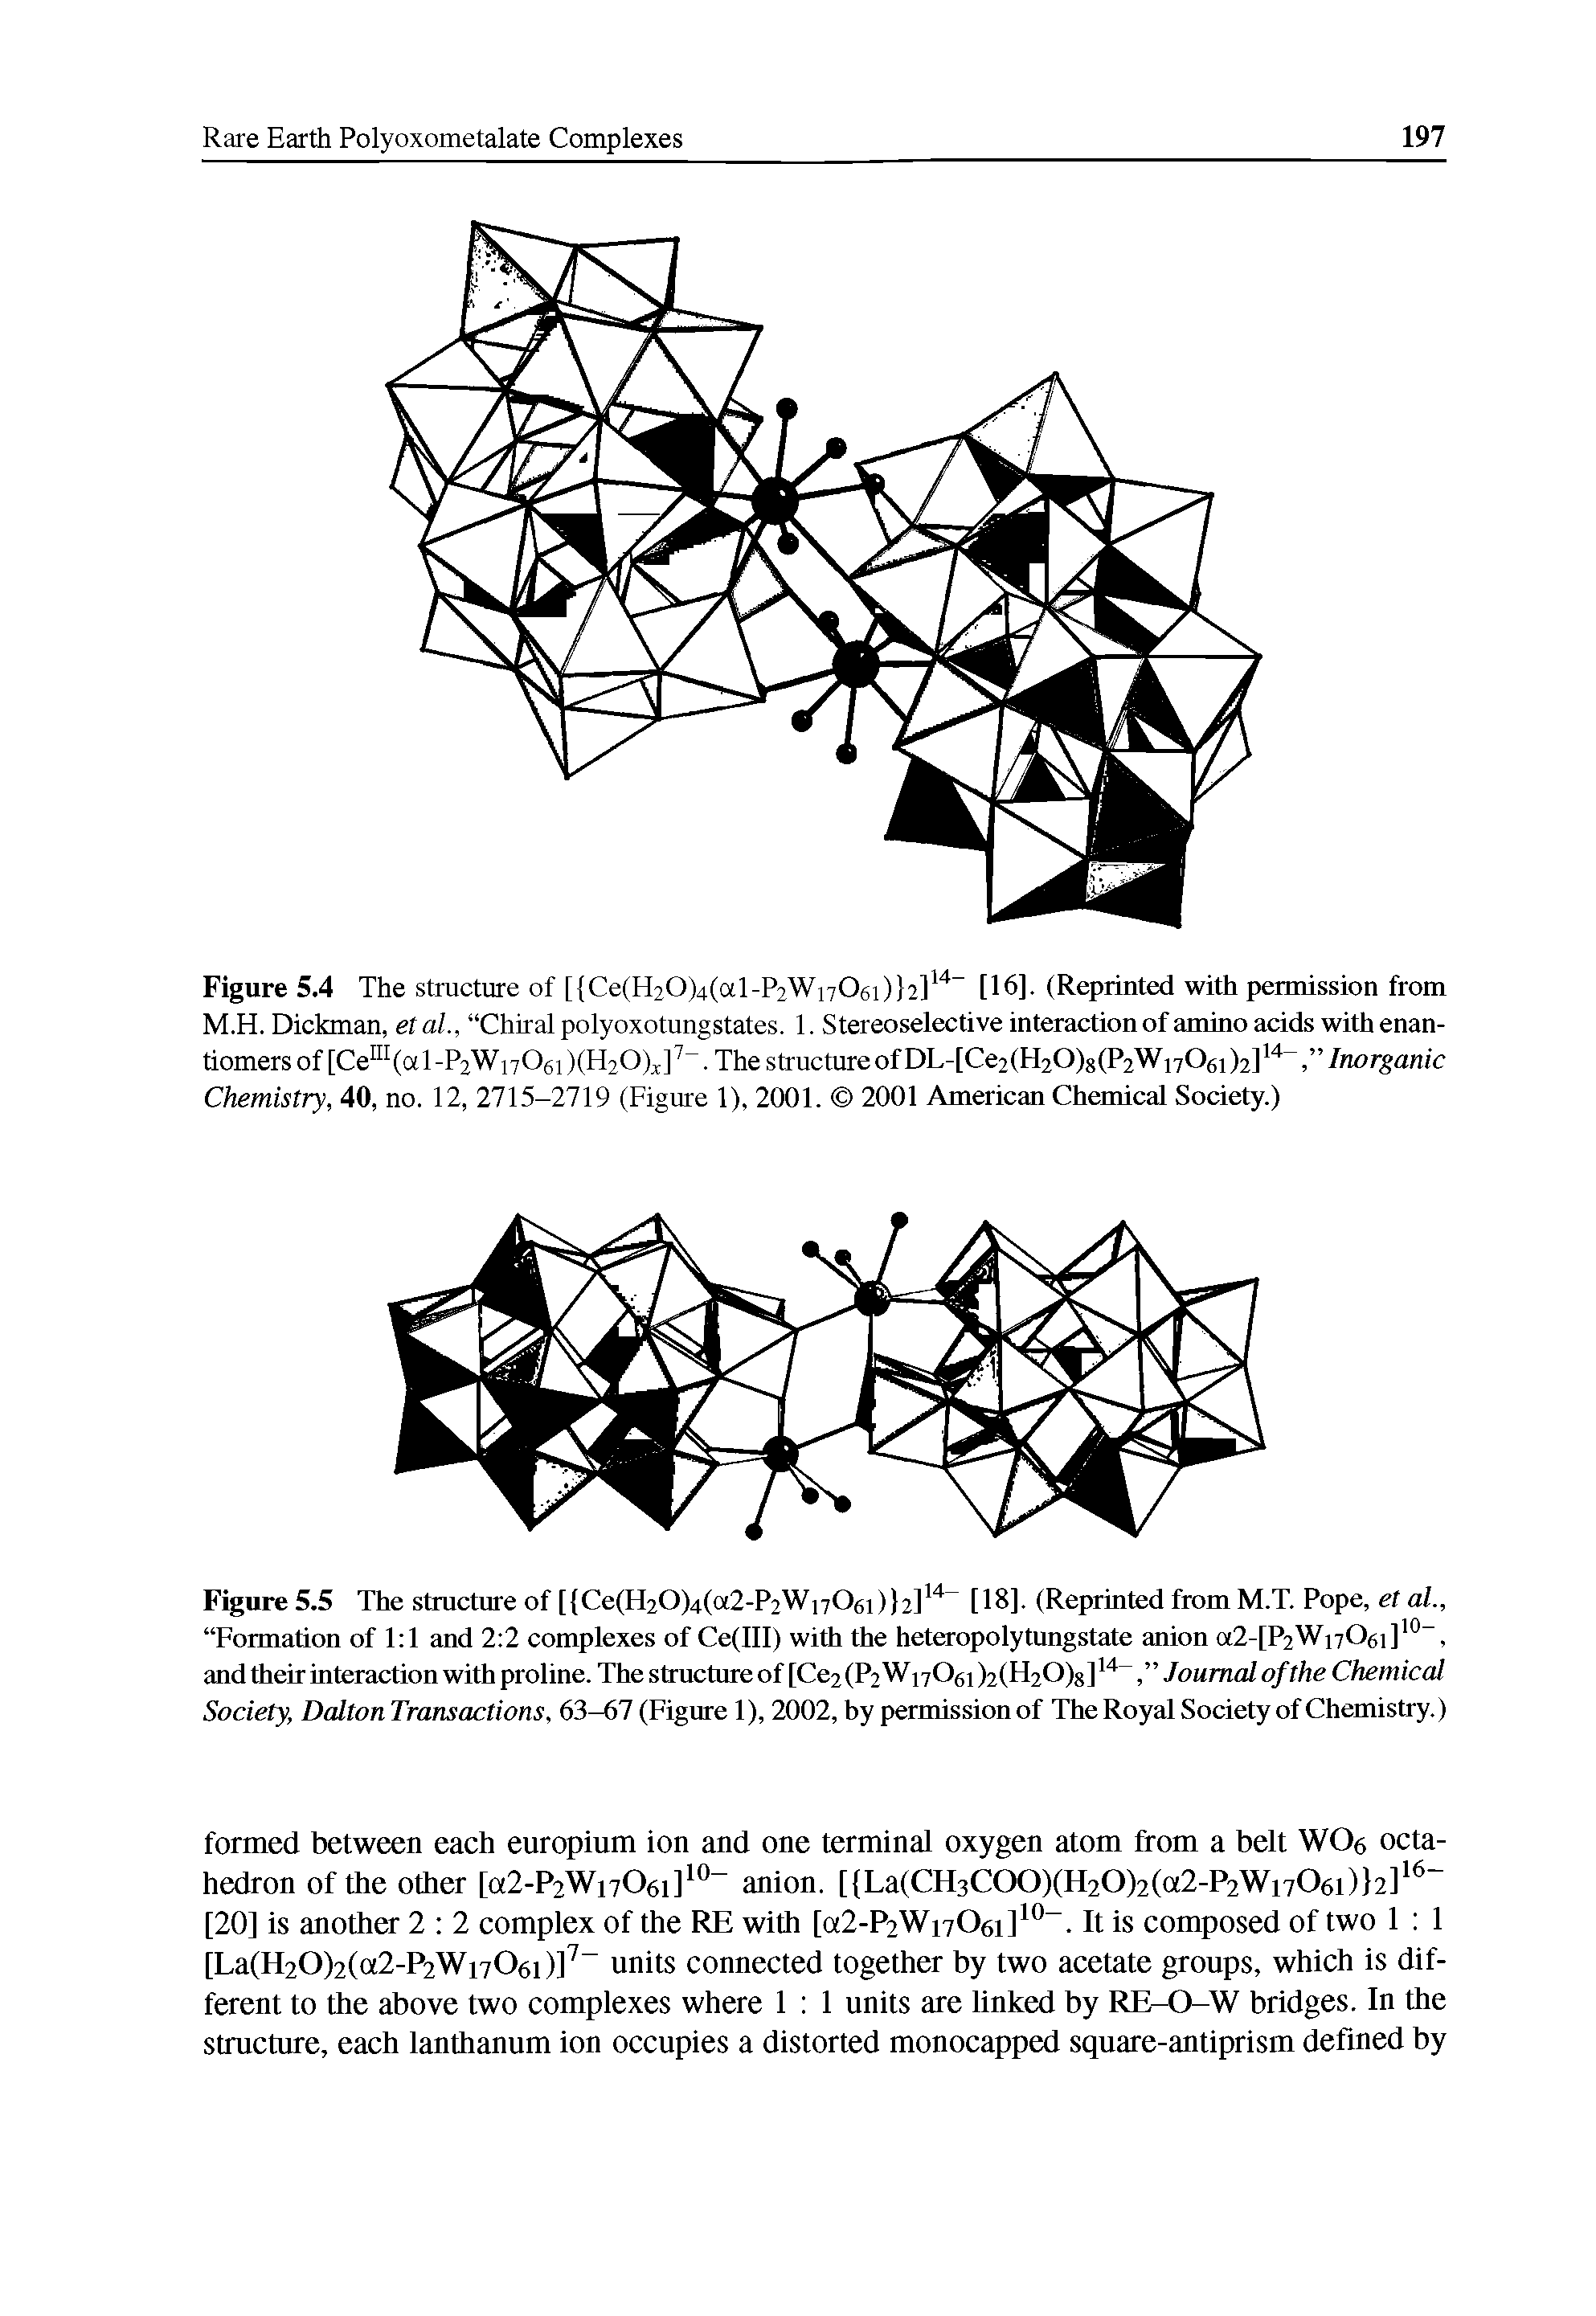 Figure 5.5 The structure of [ Ce(H20)4(a2-P2Wn06i) 2] [18]. (Reprinted from M.T. Pope, et al., Formation of 1 1 and 2 2 complexes of Ce(III) with the heteropolytungstate anion a2-[P2Wi706i] ° , and their interaction with proline. The structure of [Ce2 (P2 WnOei )2(H20)g] Journal of the Chemical...